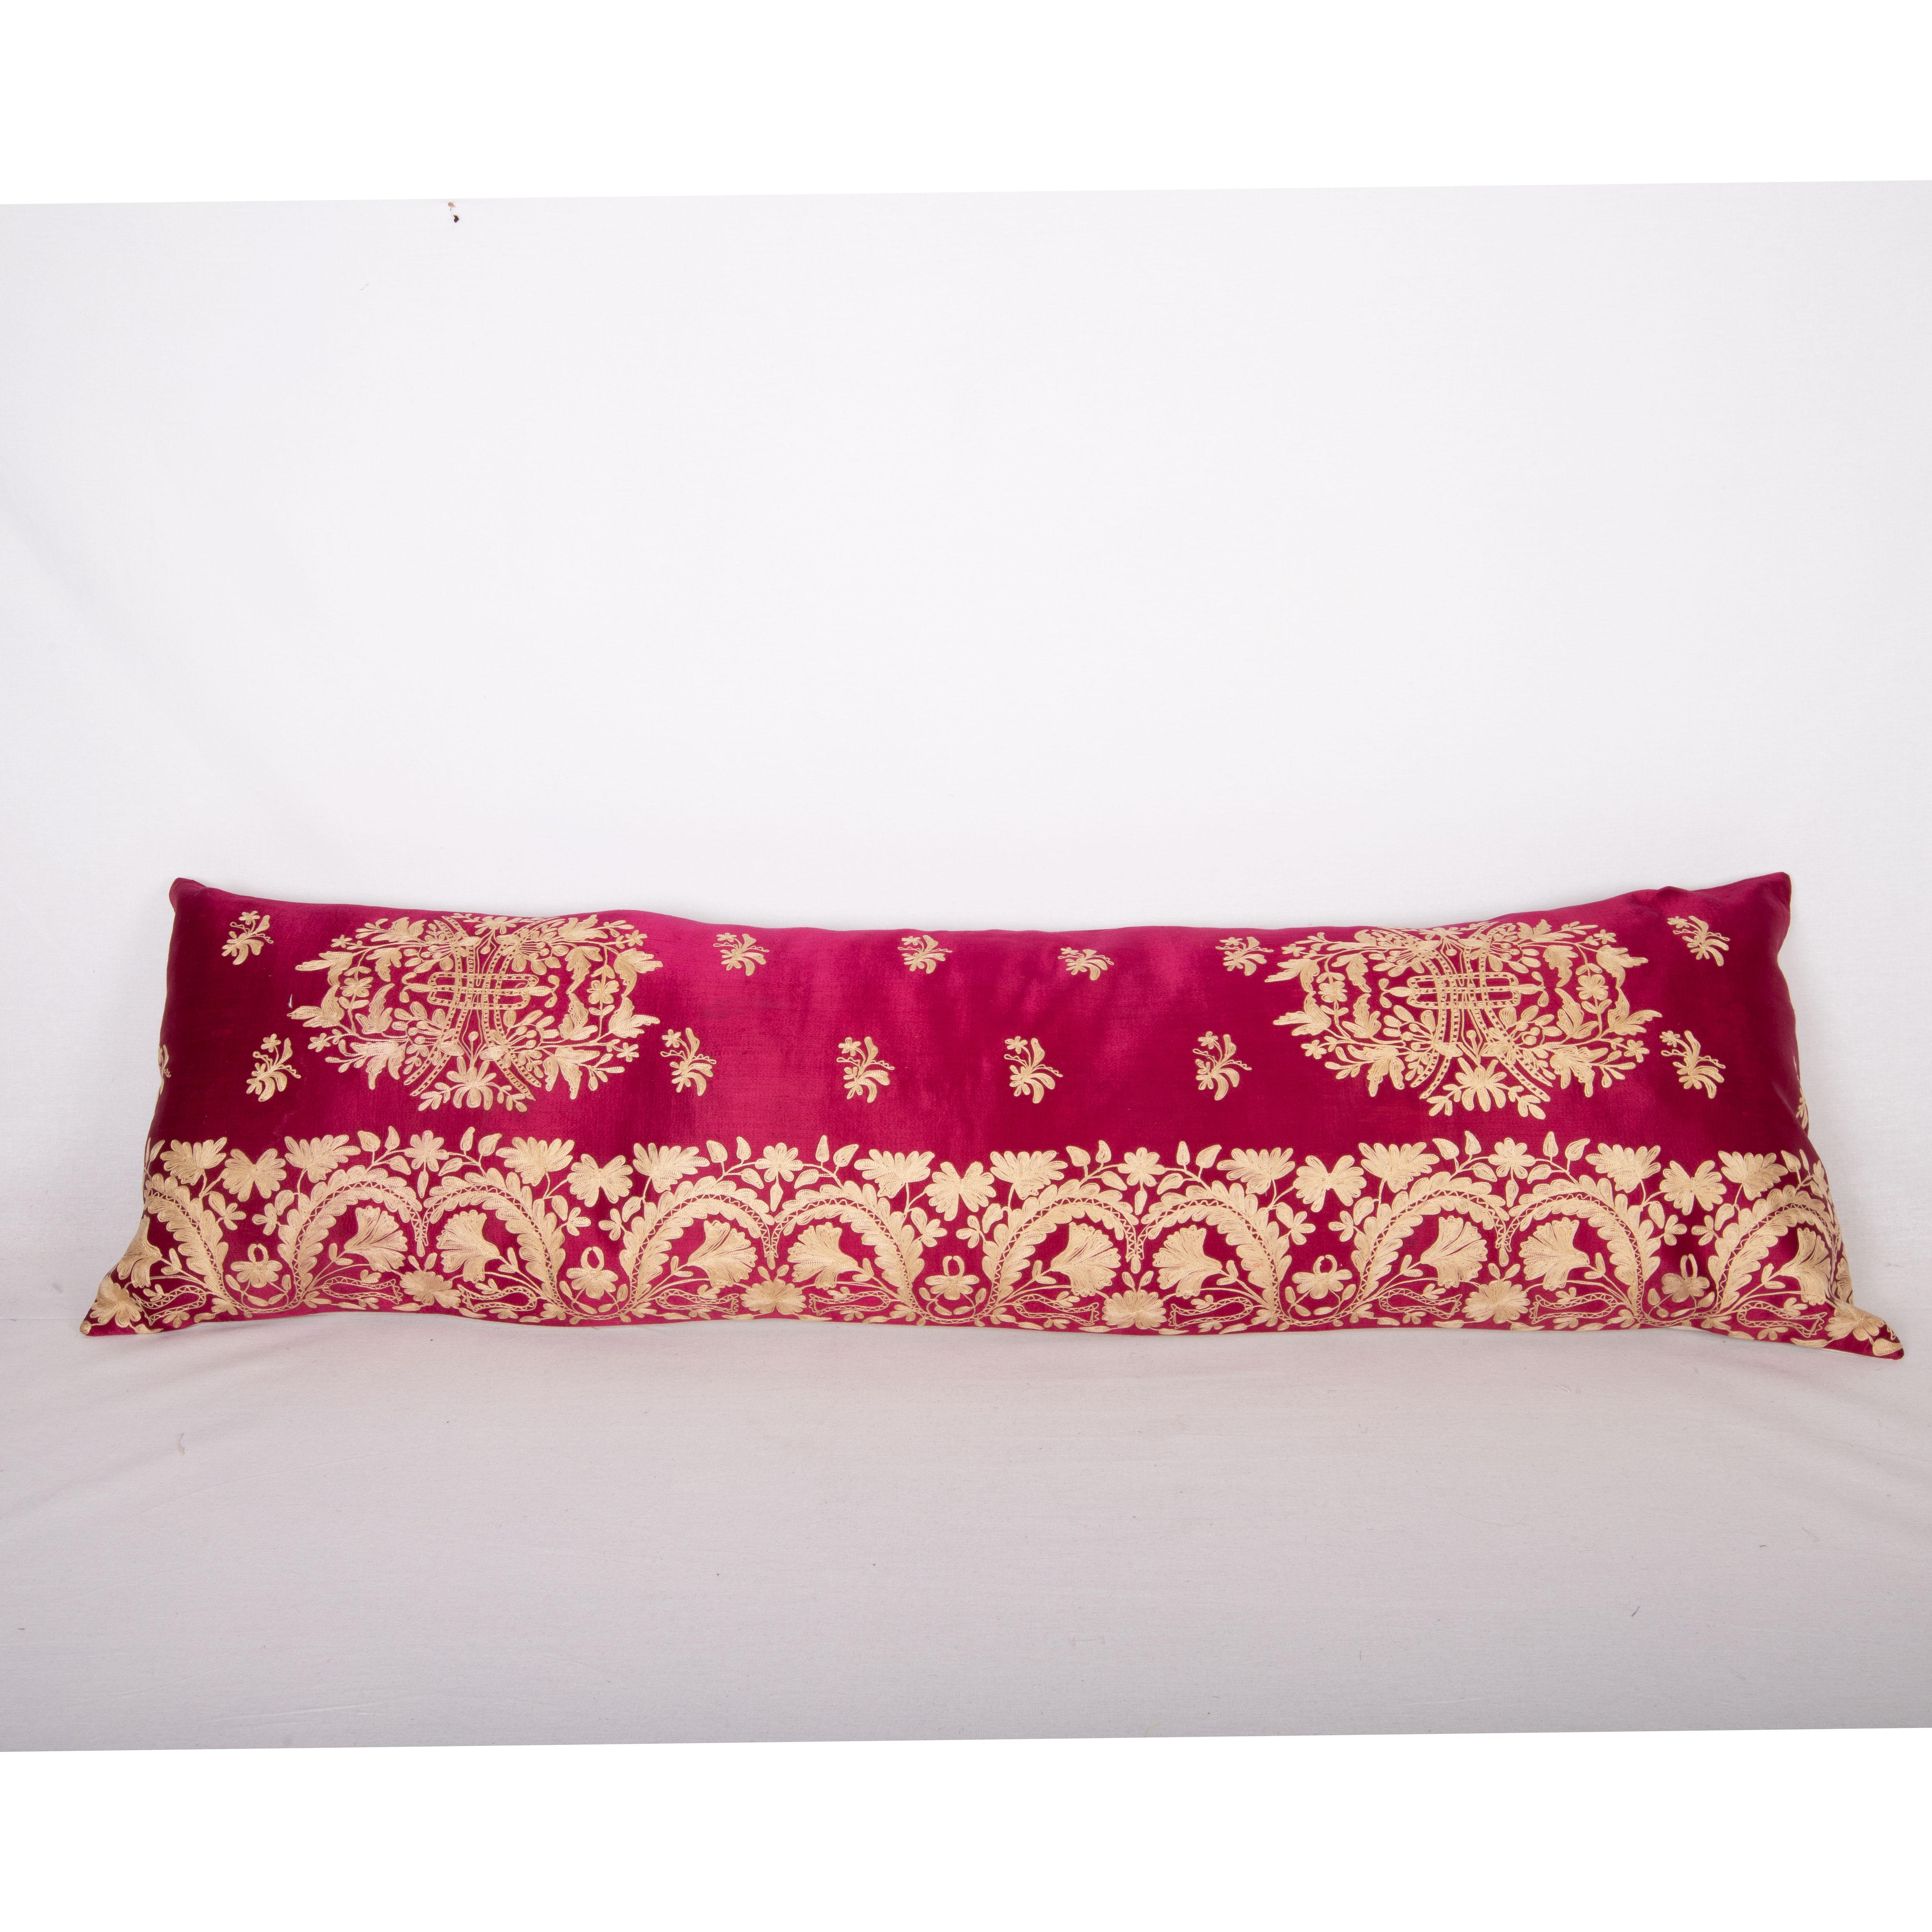 This pillow case is made from an Early 20th C. embroidery from Ottoman Turkey.

It does not come with an insert but a bag made to the size to accommodate insert materials.
Linen in the back.
Zipper closure.
Dry Cleaning is reccommended.